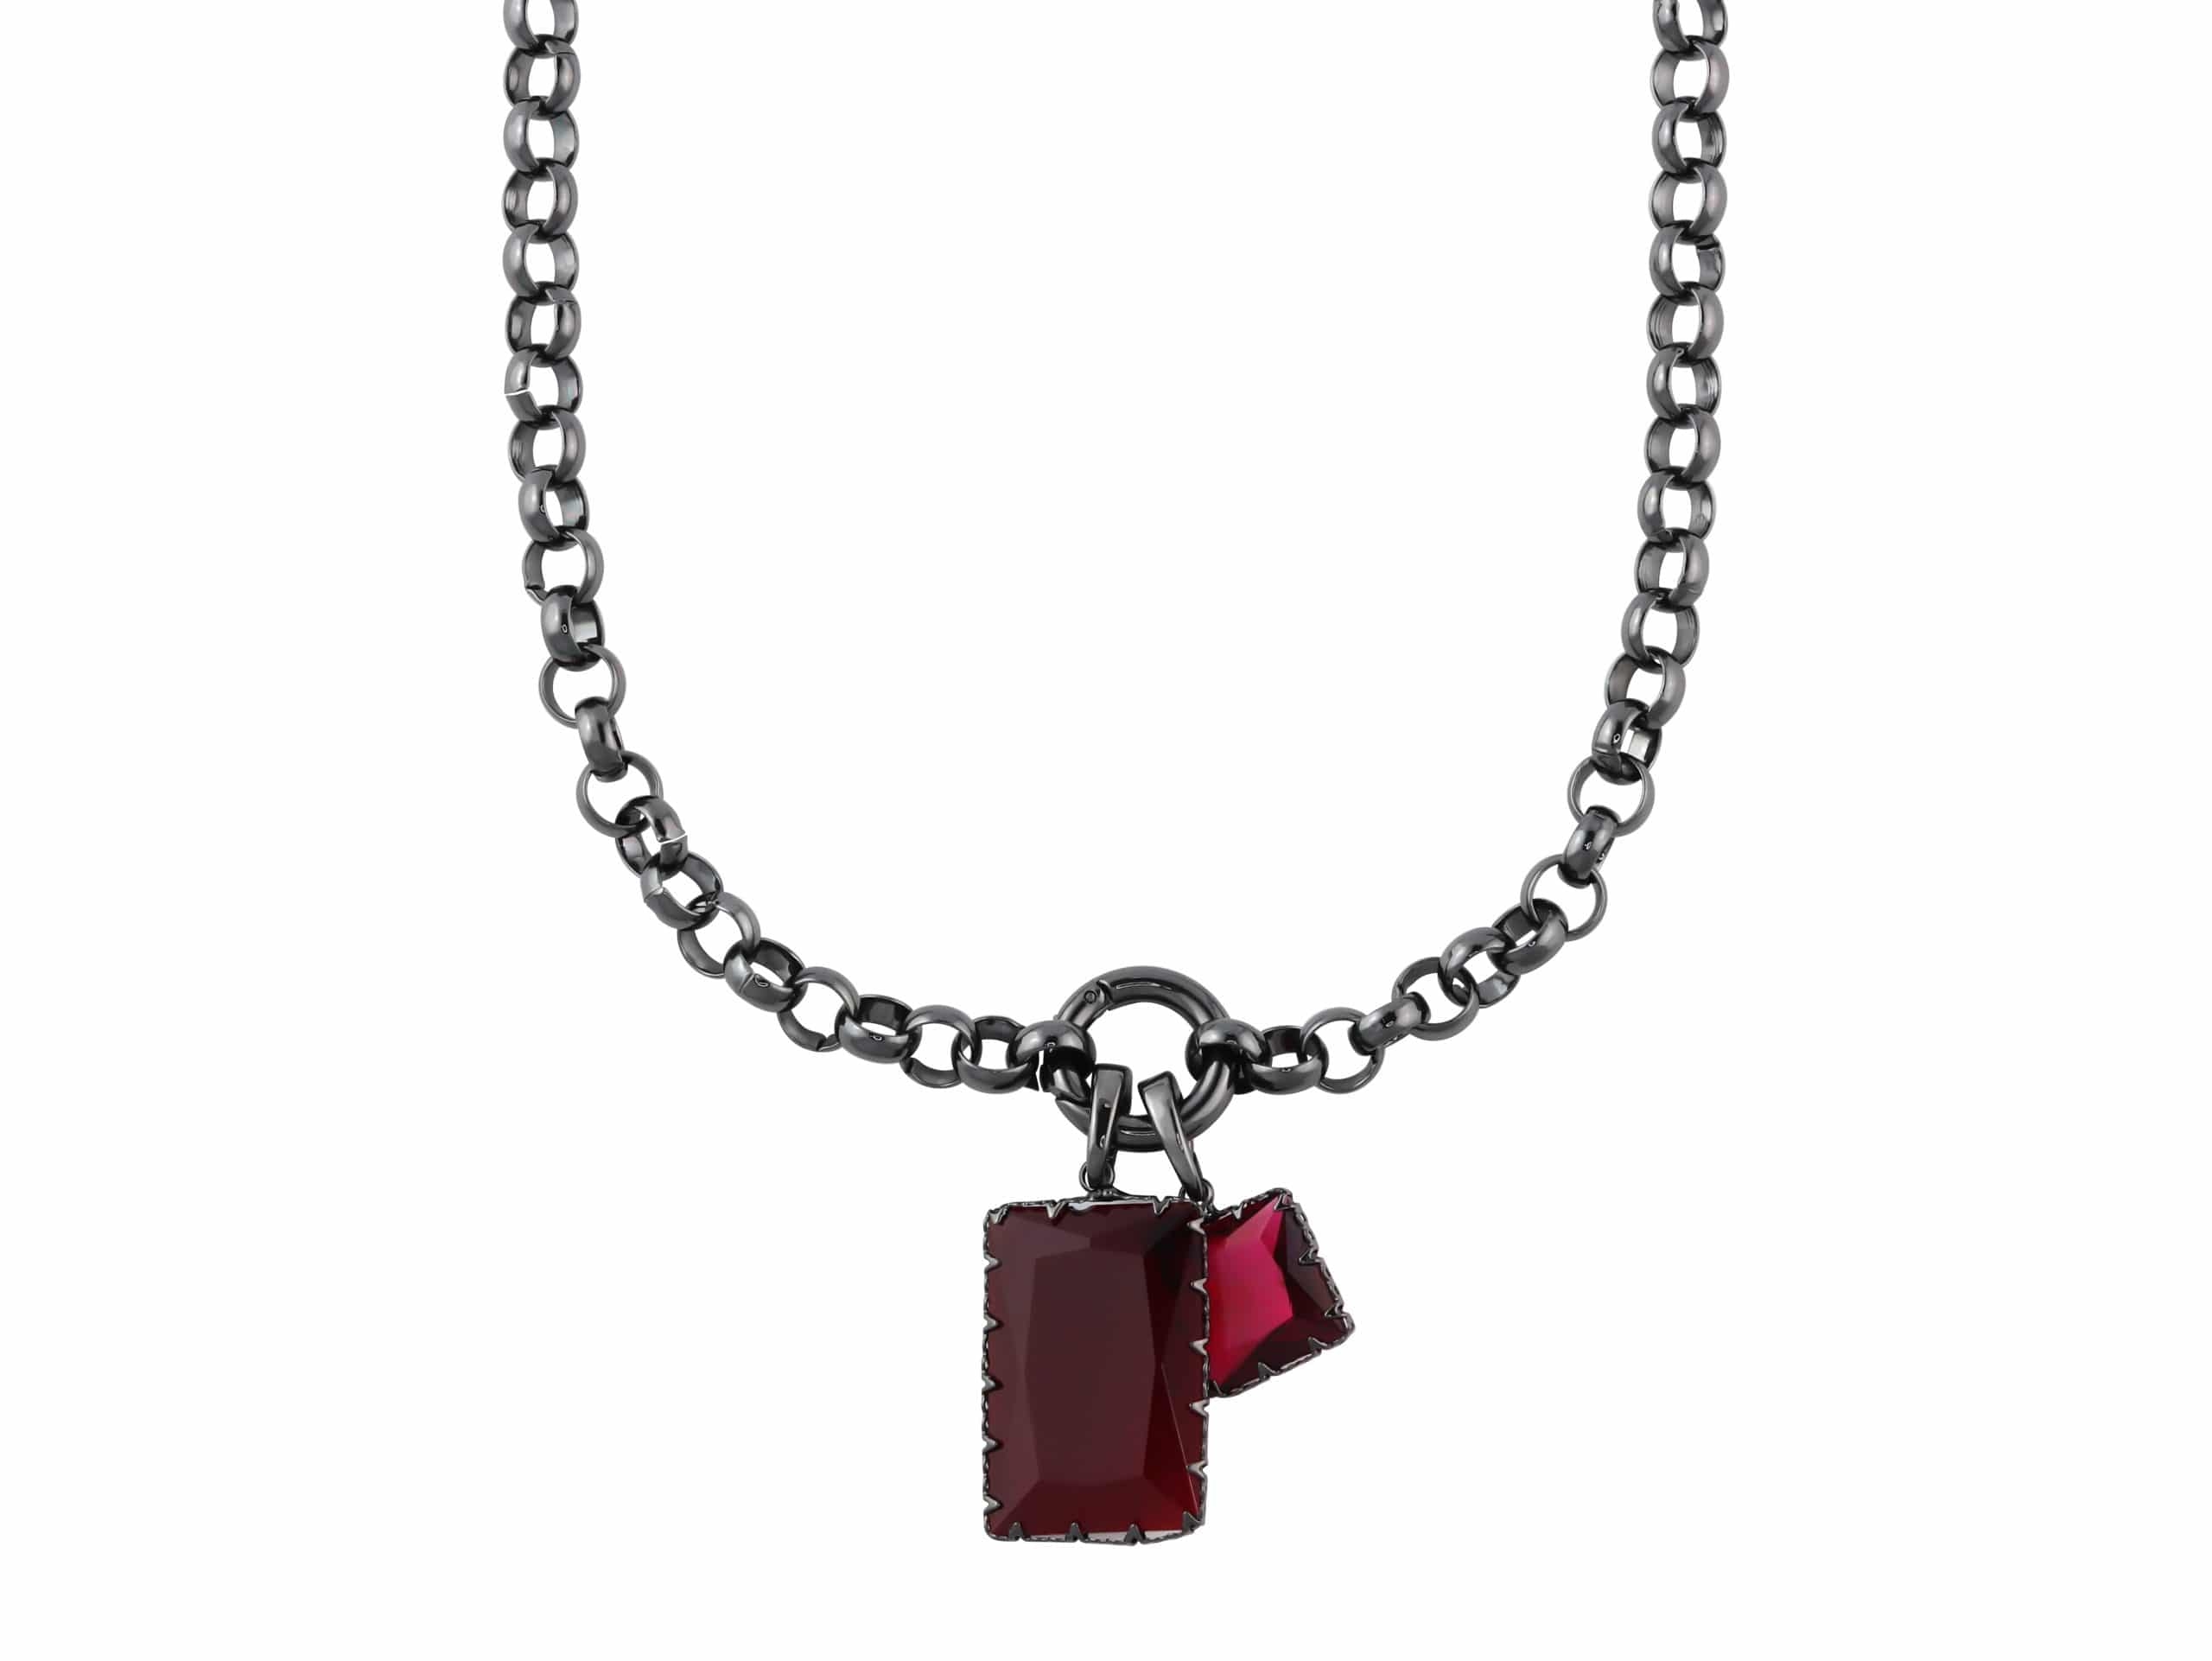 Jeanne Allure 2 Baguette Plated Brass Belcher Chain Necklace in Hematite, Fuchsia and Ruby – Big Metal London